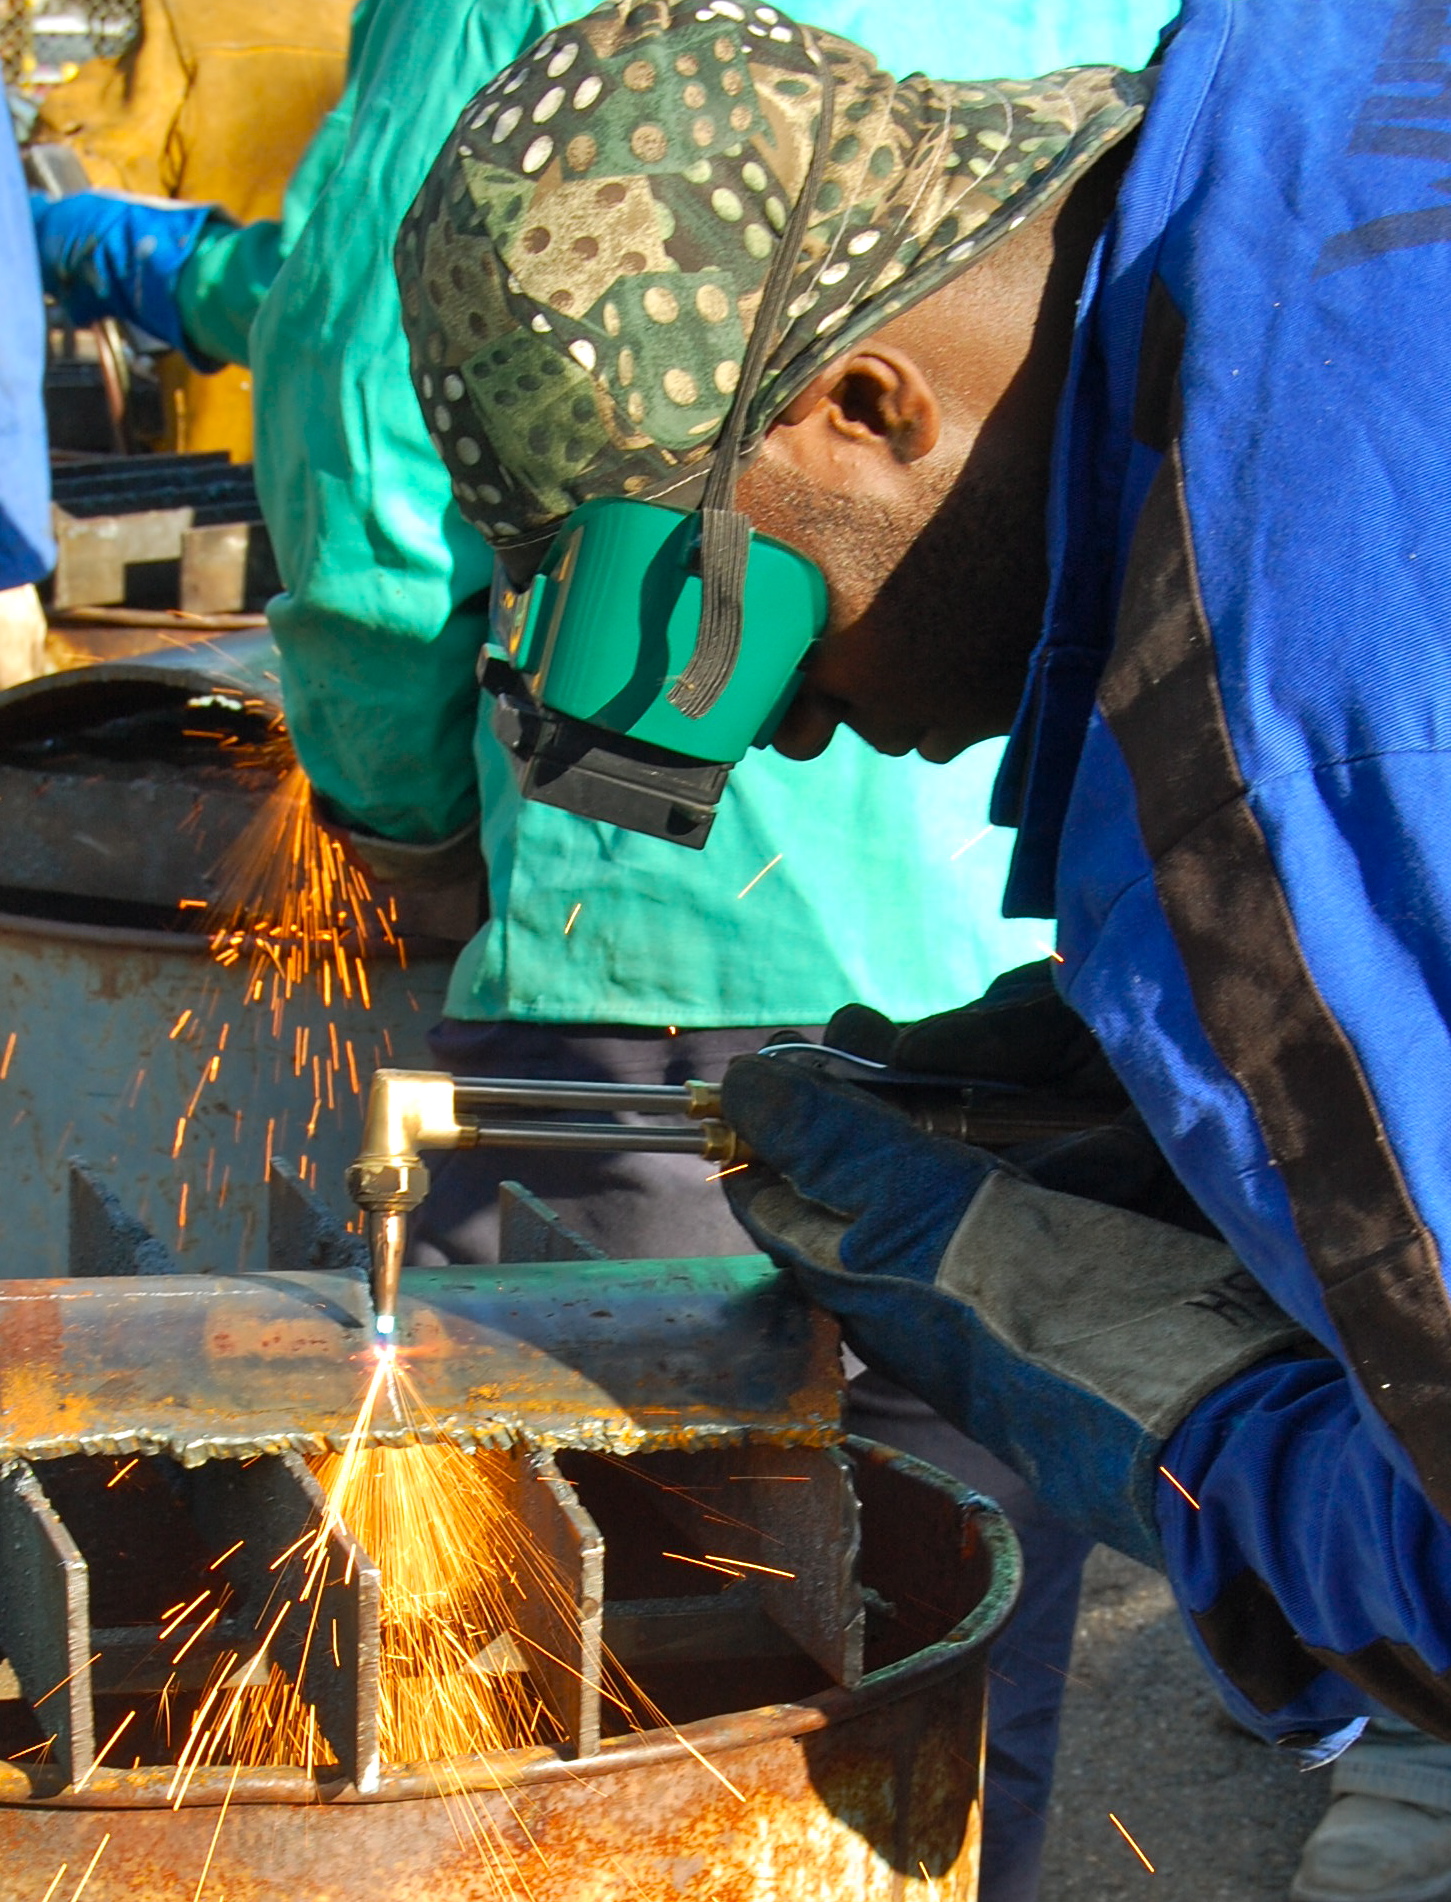 Cutting metal with oxyacetylene torch wearing protective gloves